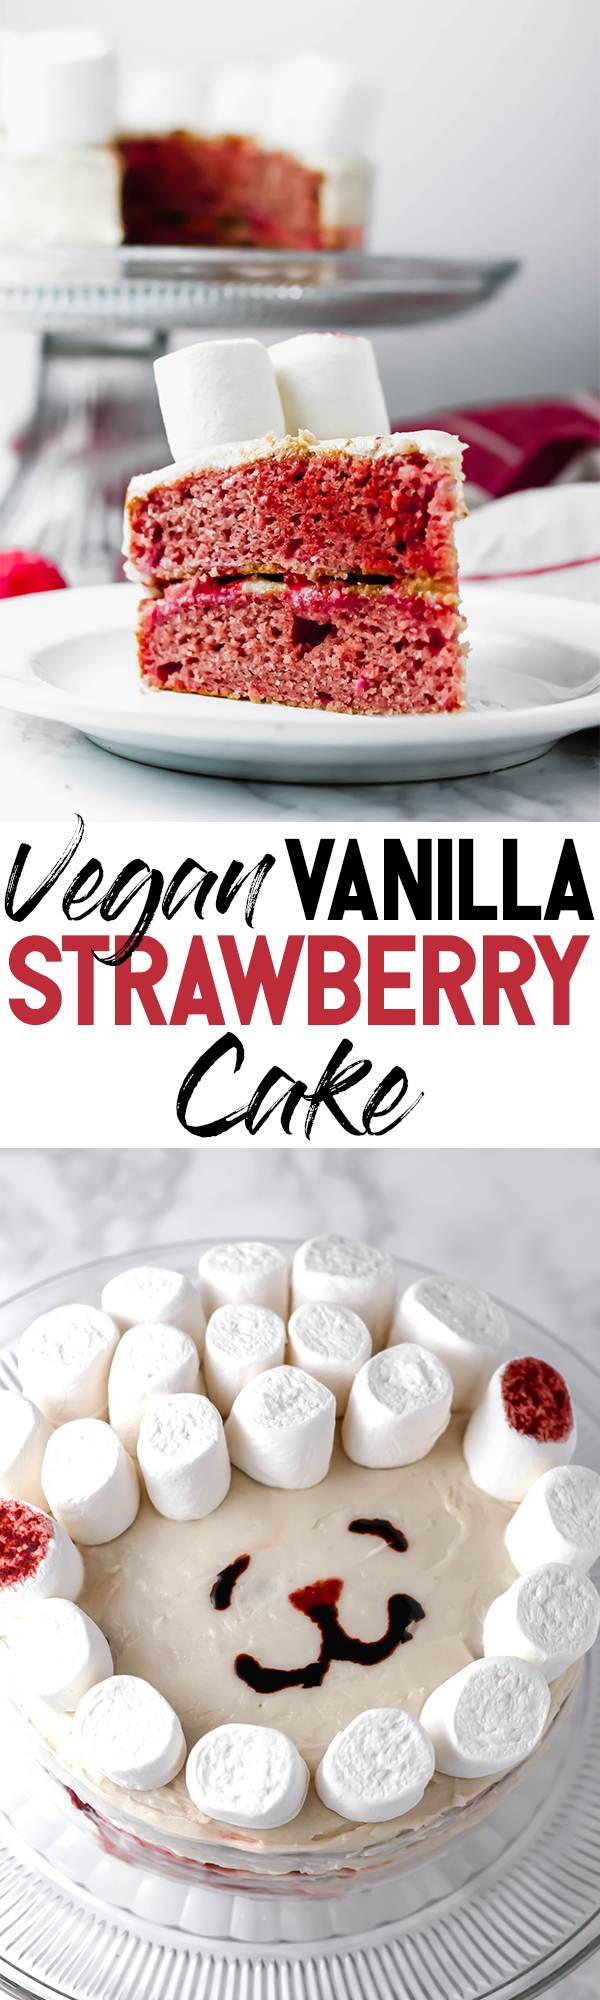 This fluffy, decadent Vegan Vanilla Strawberry Cake is perfect for any occasion—Easter, baby showers, birthday parties, you name it! To make it extra special for Easter, the cake is decorated with a marshmallow lamb.